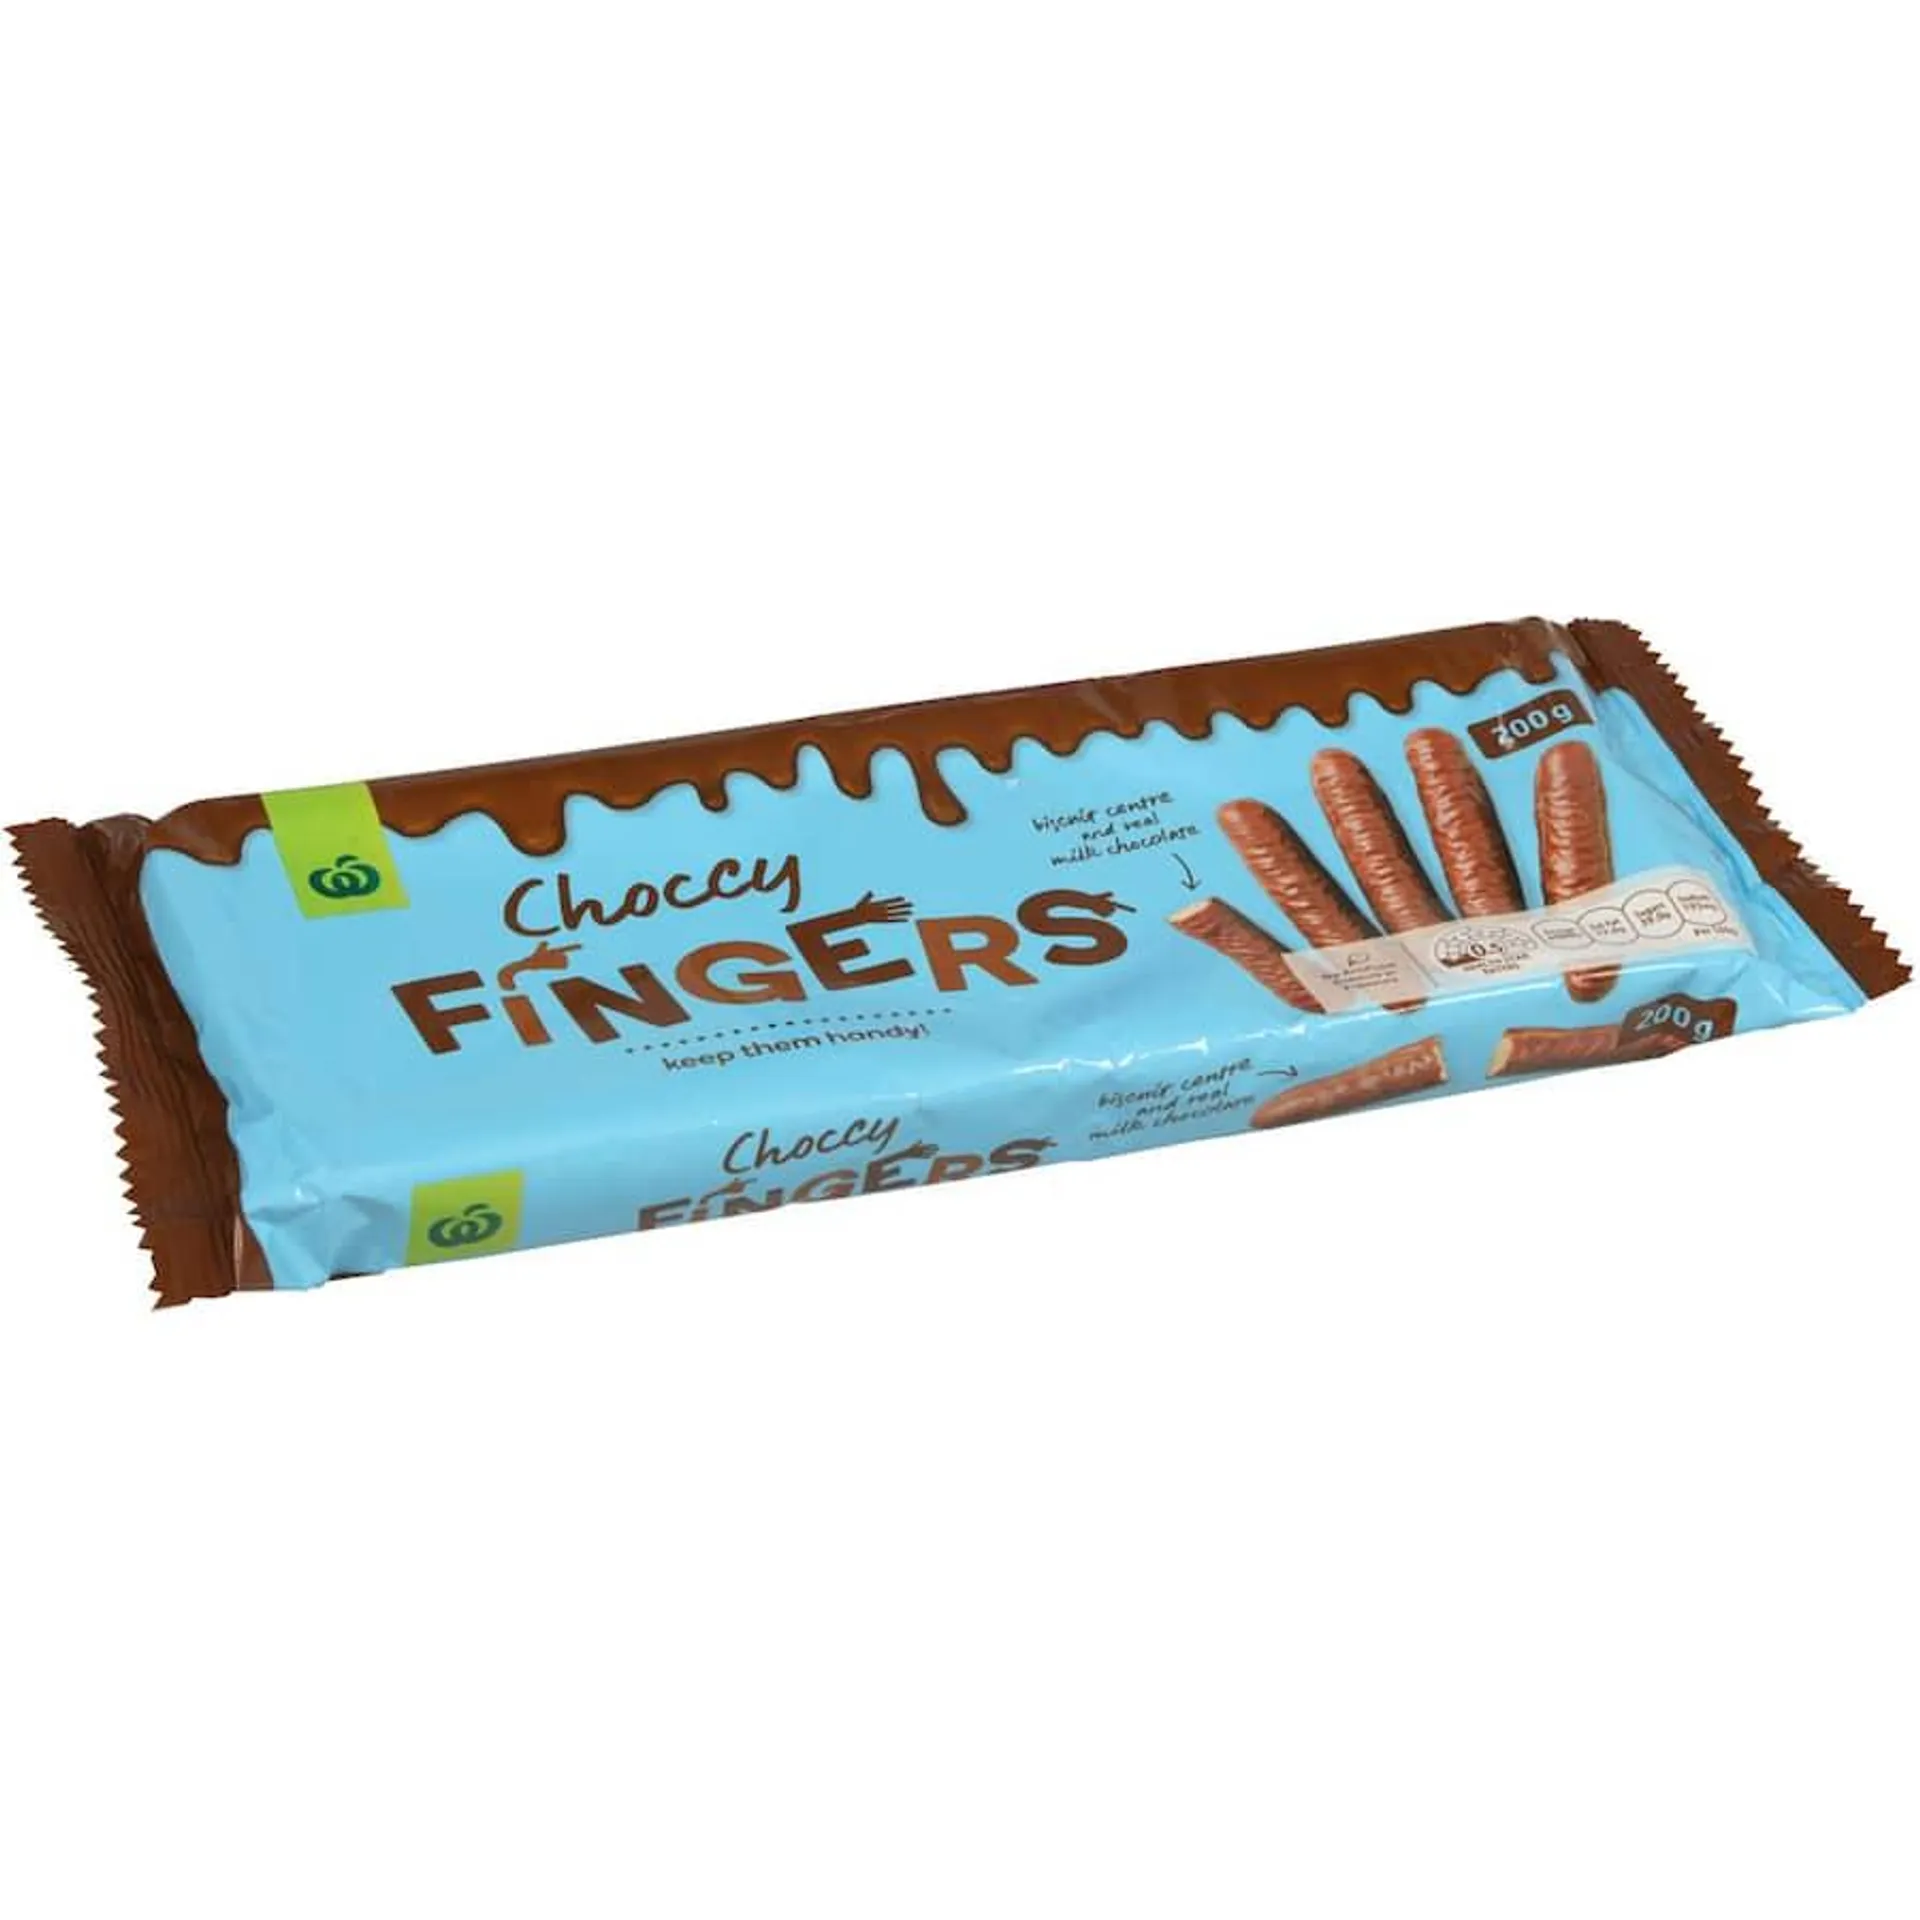 Woolworths Chocolate Biscuits Choccy Fingers